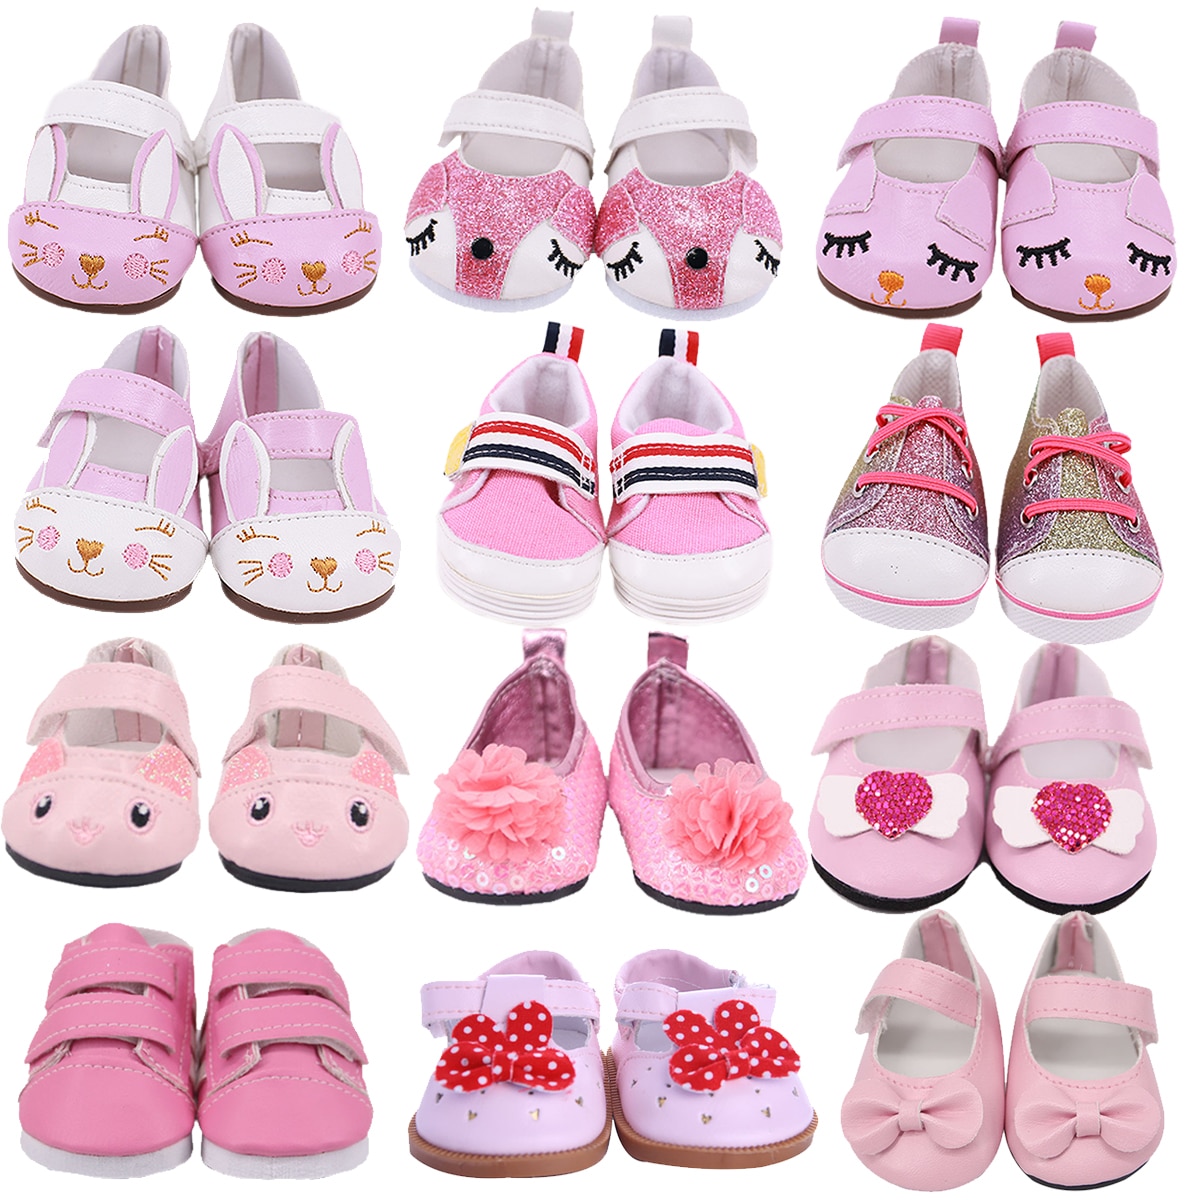 7cm Pink series Cute Cat Doll Shoes For 18Inch American Doll 43CM Born Baby Doll,Toys For Girls,Our Generation Doll Accessories